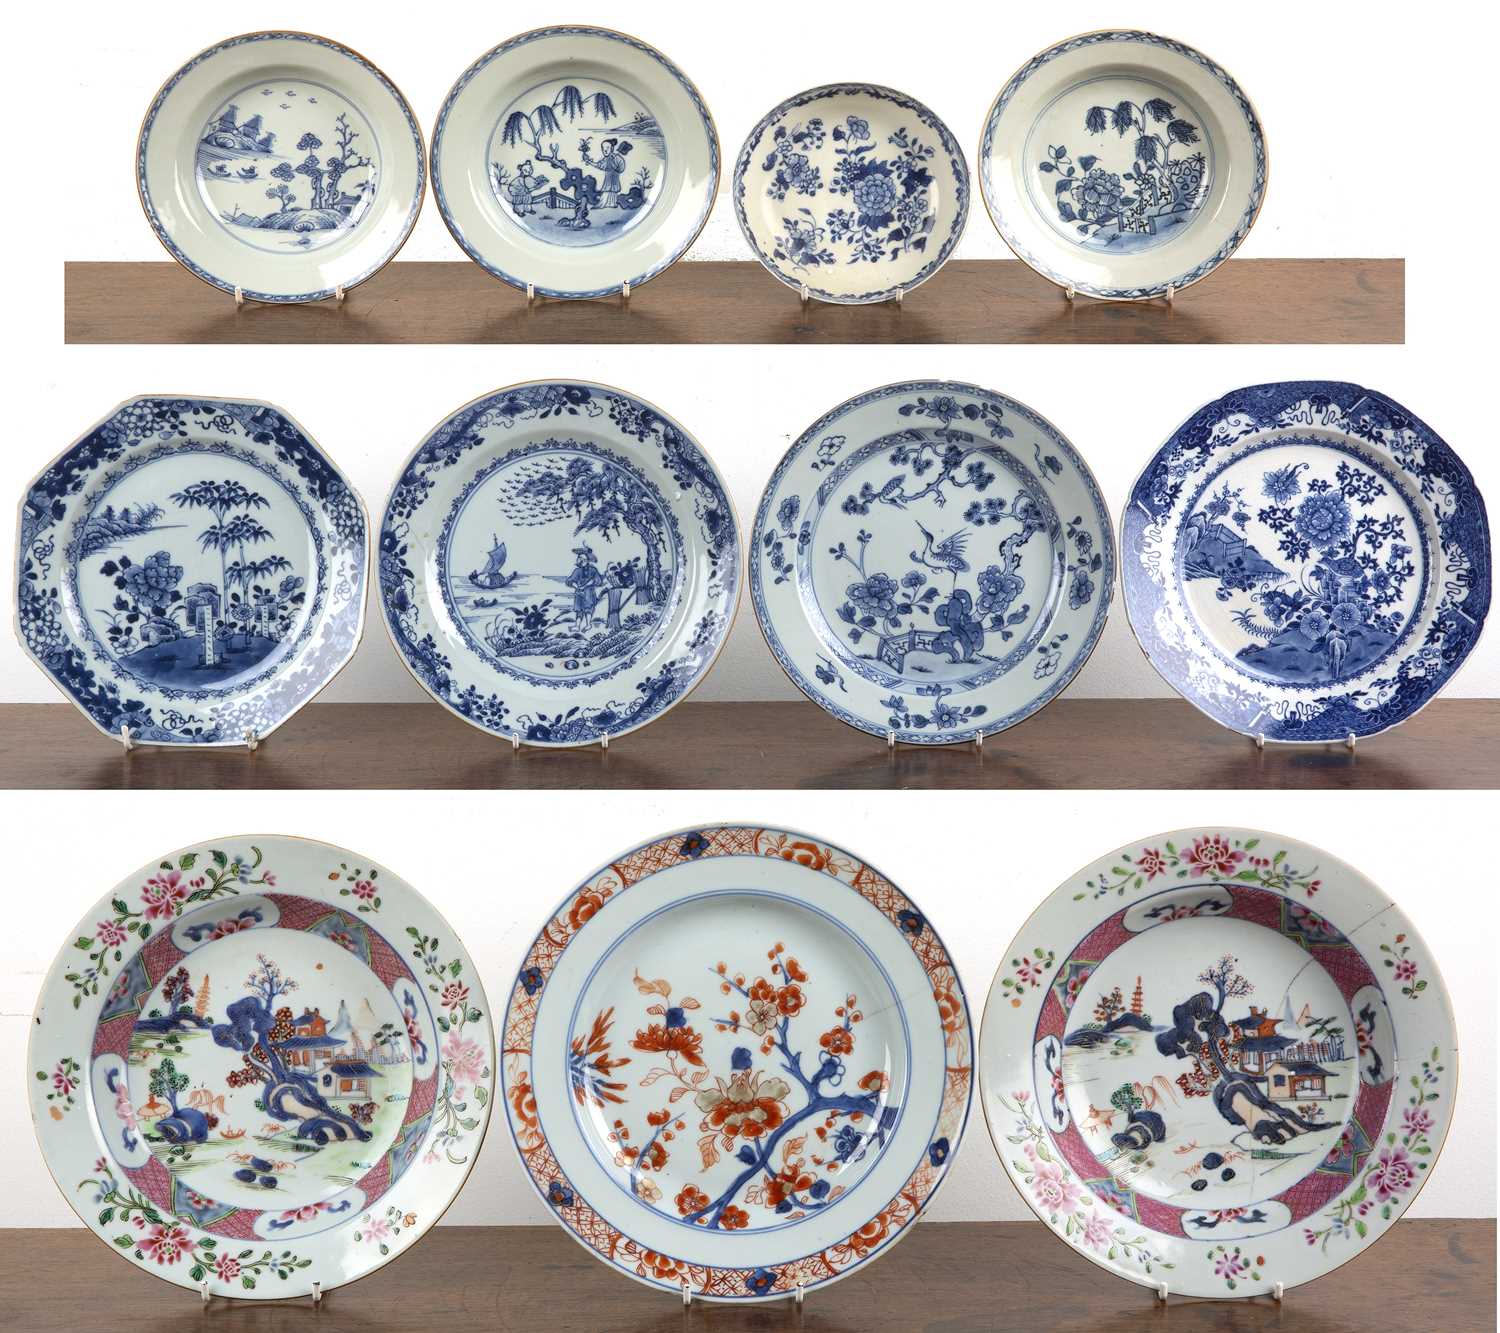 Group of porcelain plates and dishes Chinese, 18th/19th Century including famille rose, export Imari